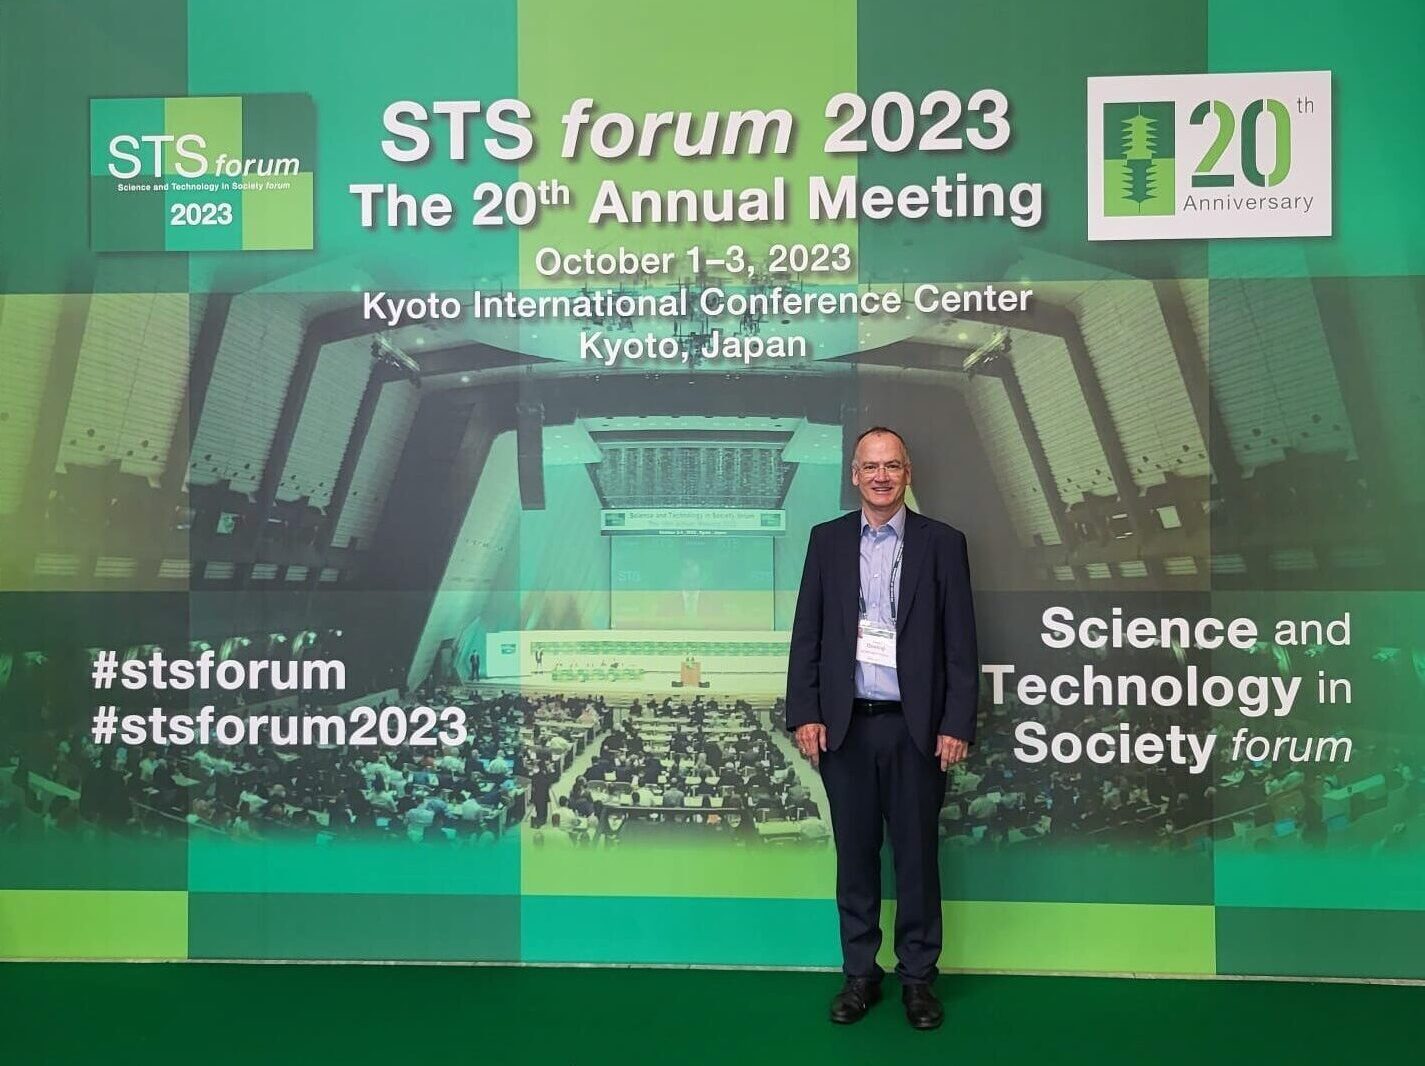 Michael Dowling beim STS forum 2023.